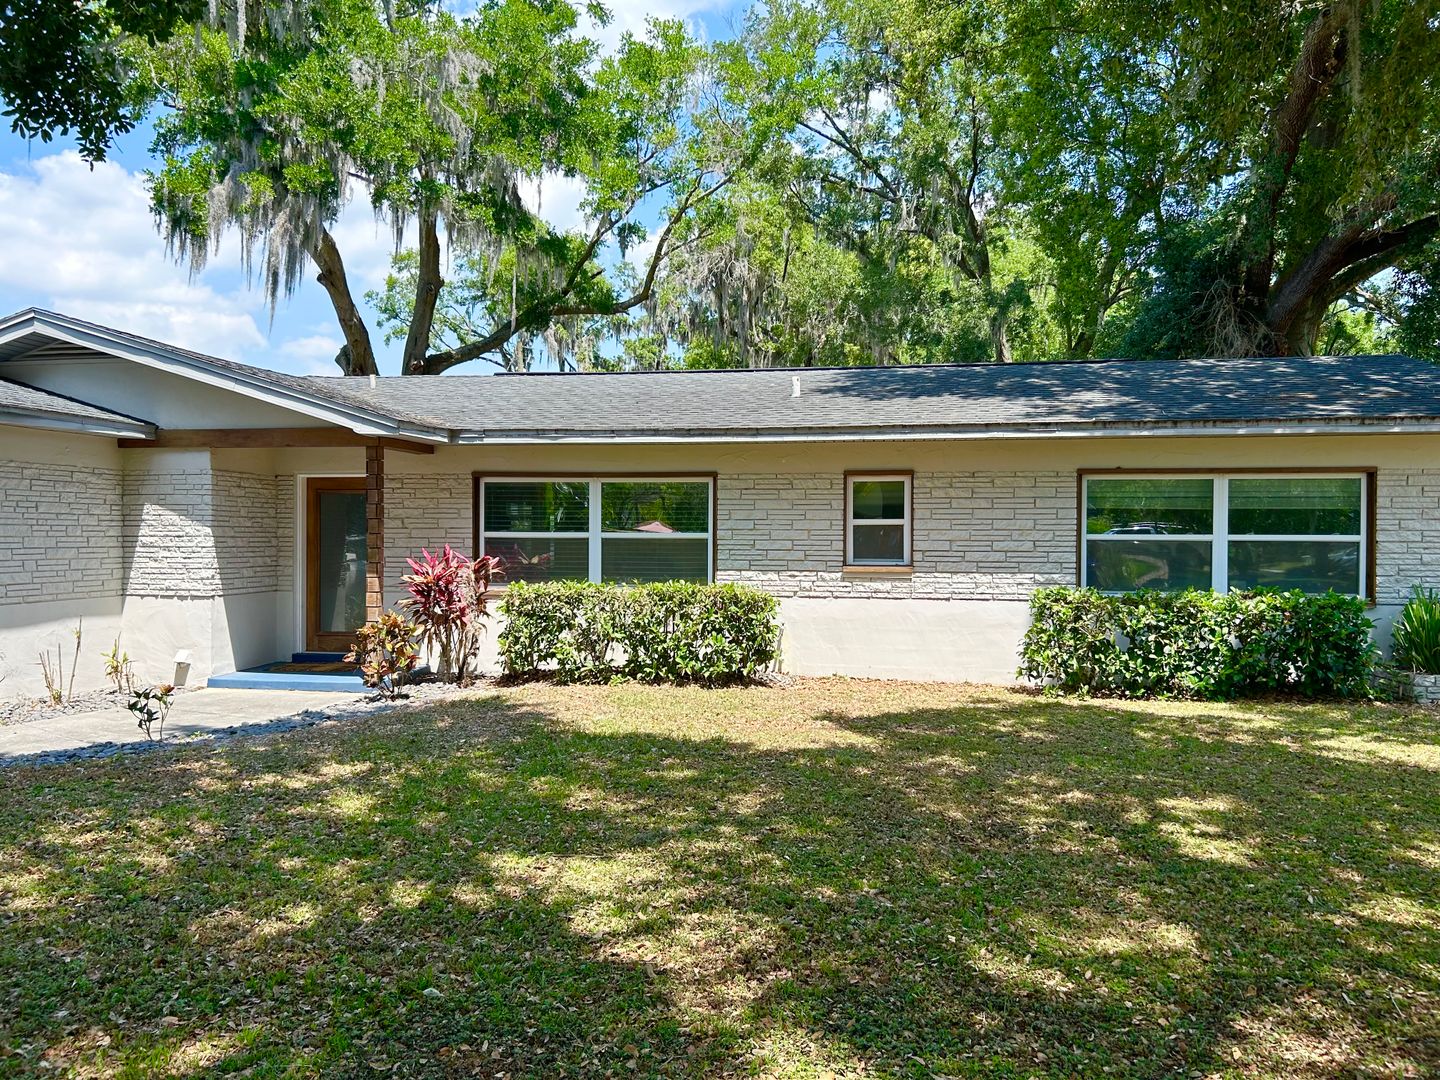 Gorgeous 3/2 Mid-century Modern Style Home with a Covered Patio and a Large Backyard in the Desirable Albert Lee Ridge Community - Winter Park!